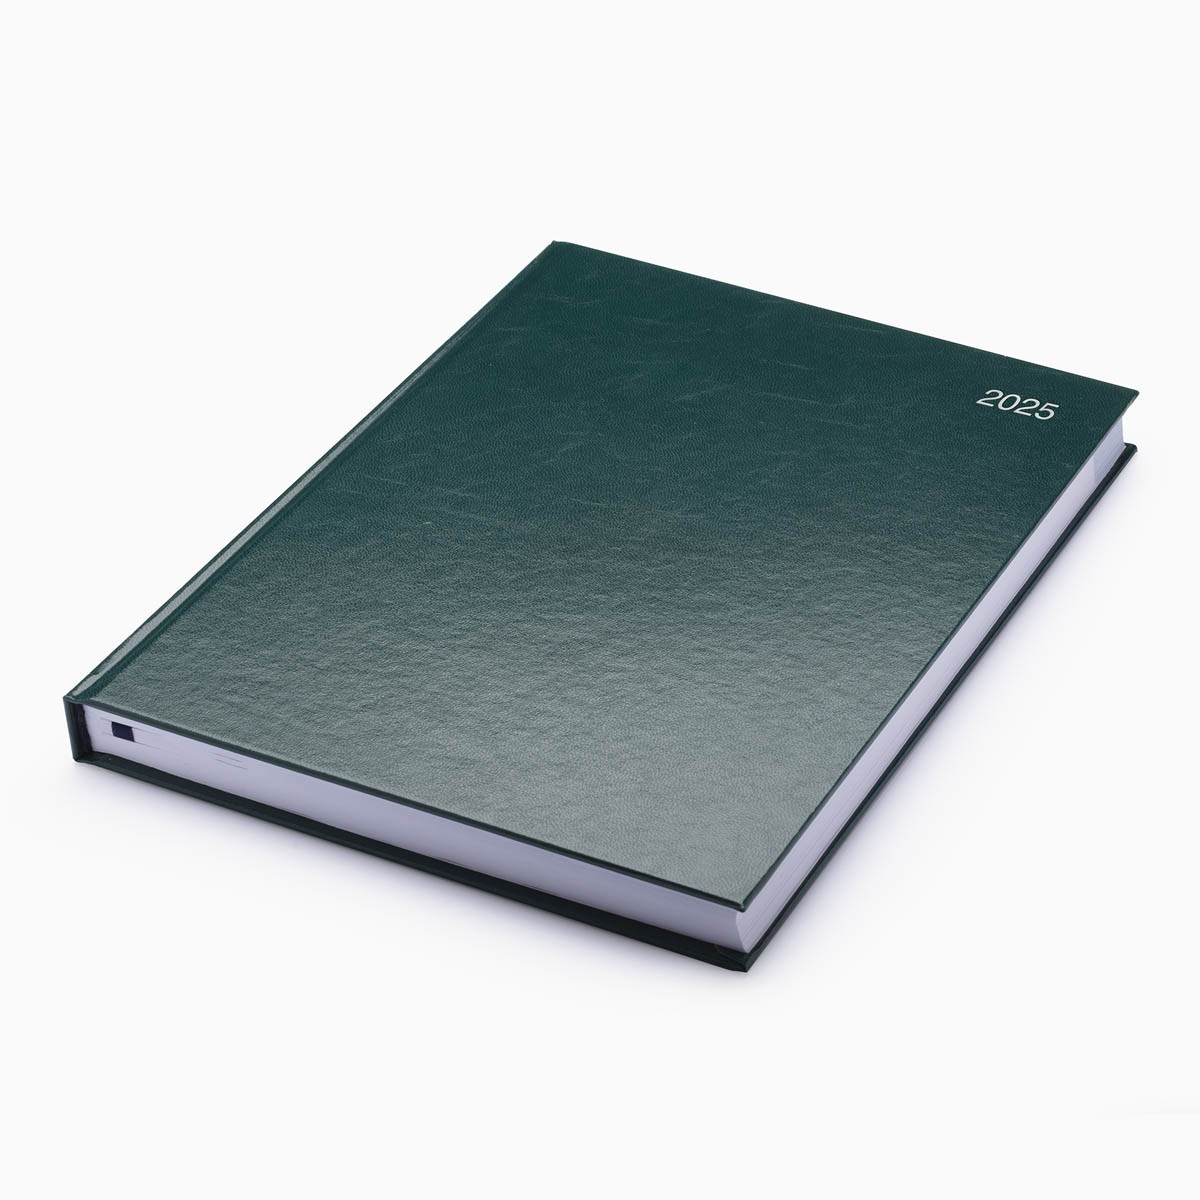 Strata A4 Diary - White Pages